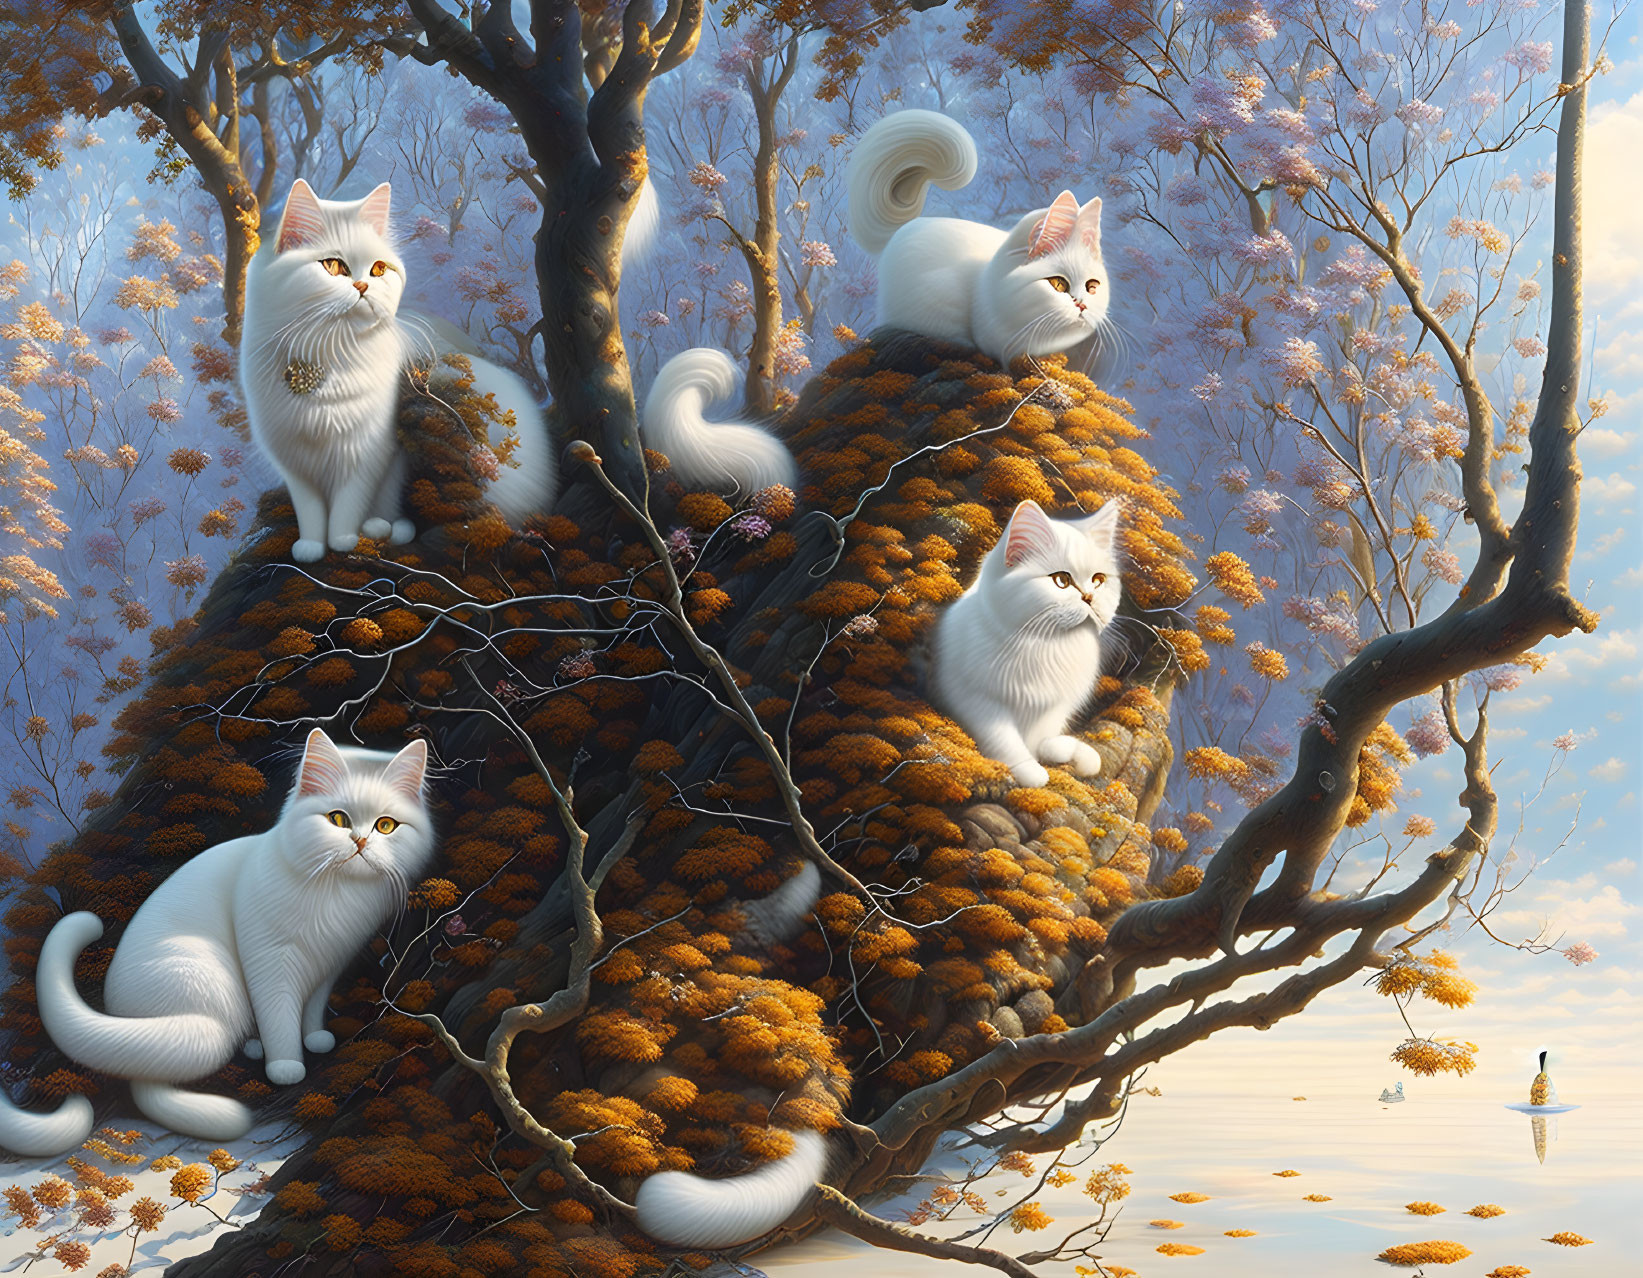 Four White Fluffy Cats with Swirling Tails on Autumnal Tree by Serene Lake